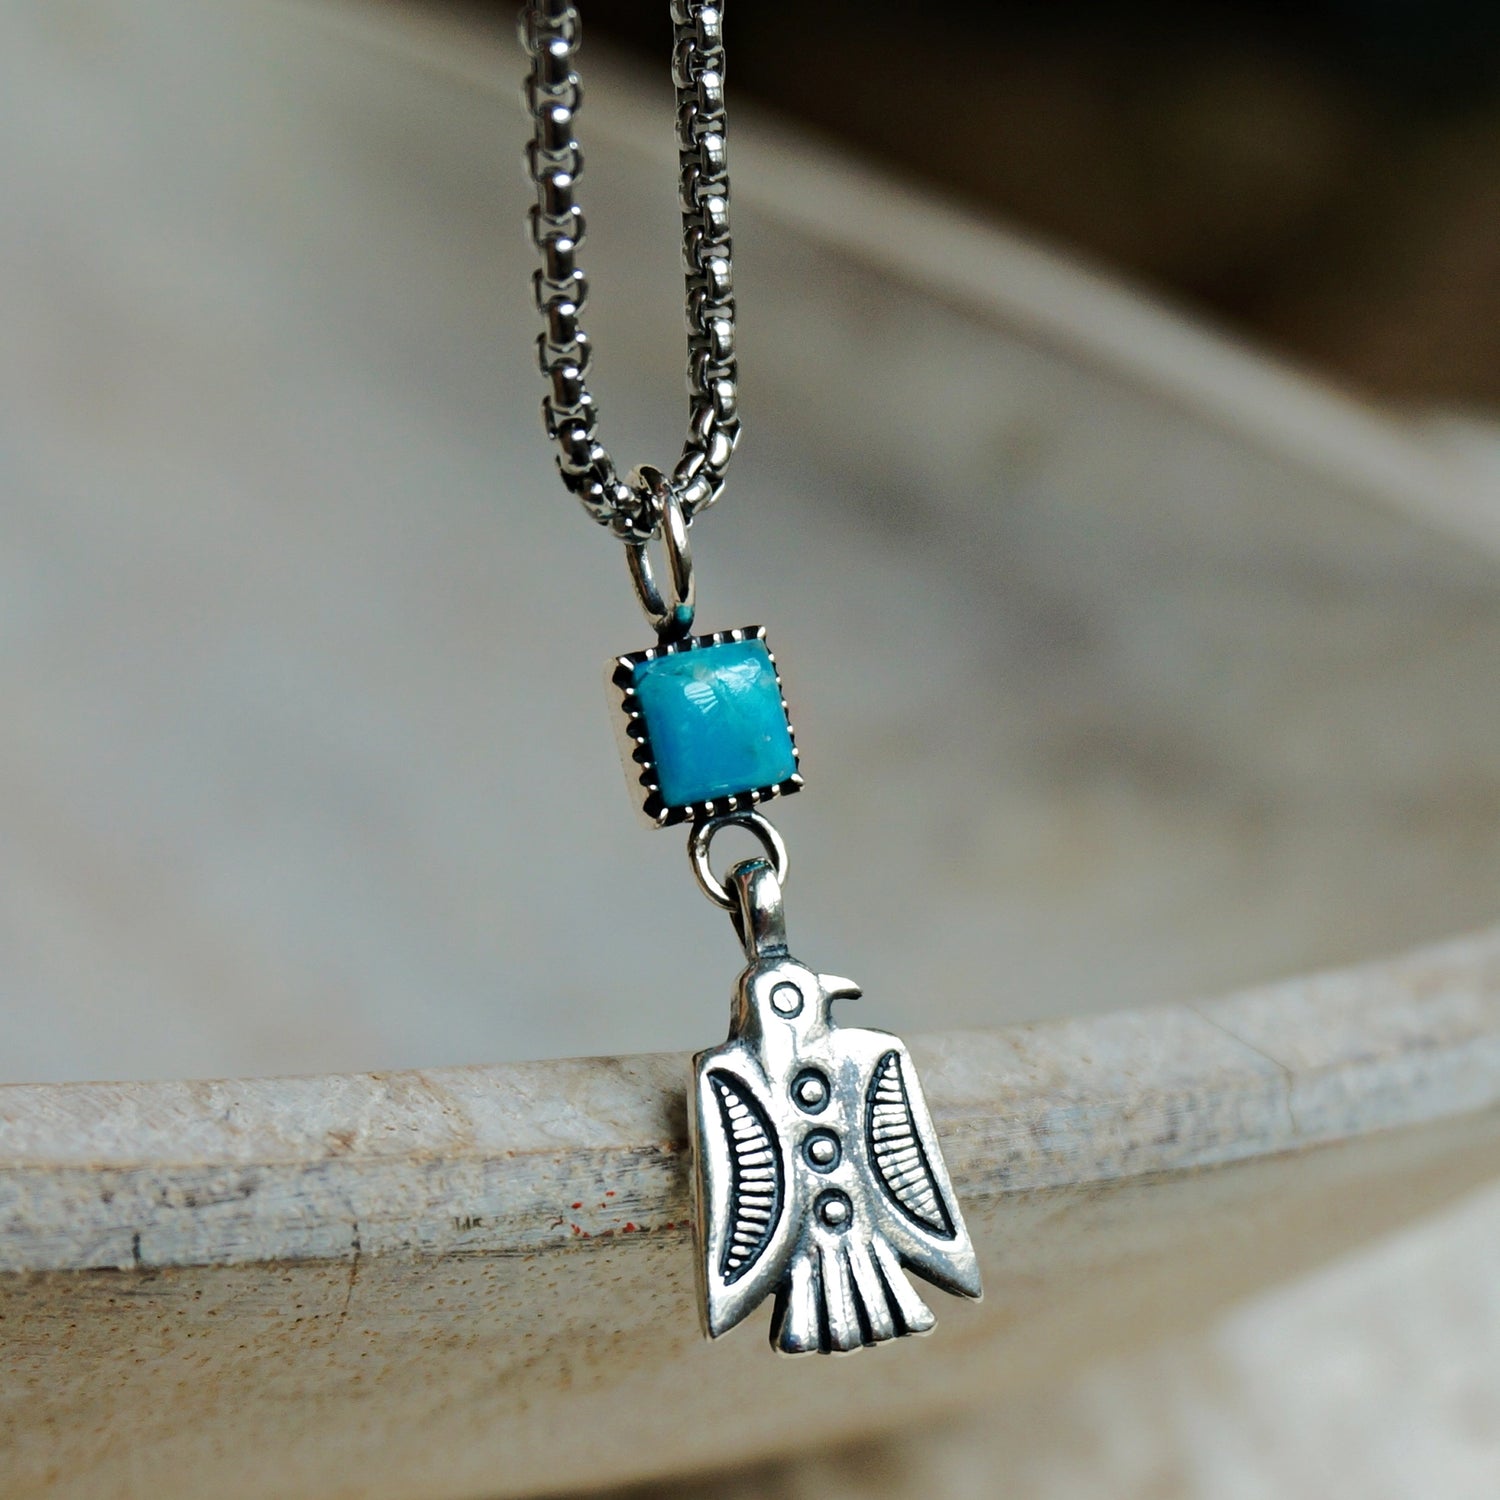 Thunderbird Charm Necklace - Sterling Silver - Moon Room Shop and Wellness